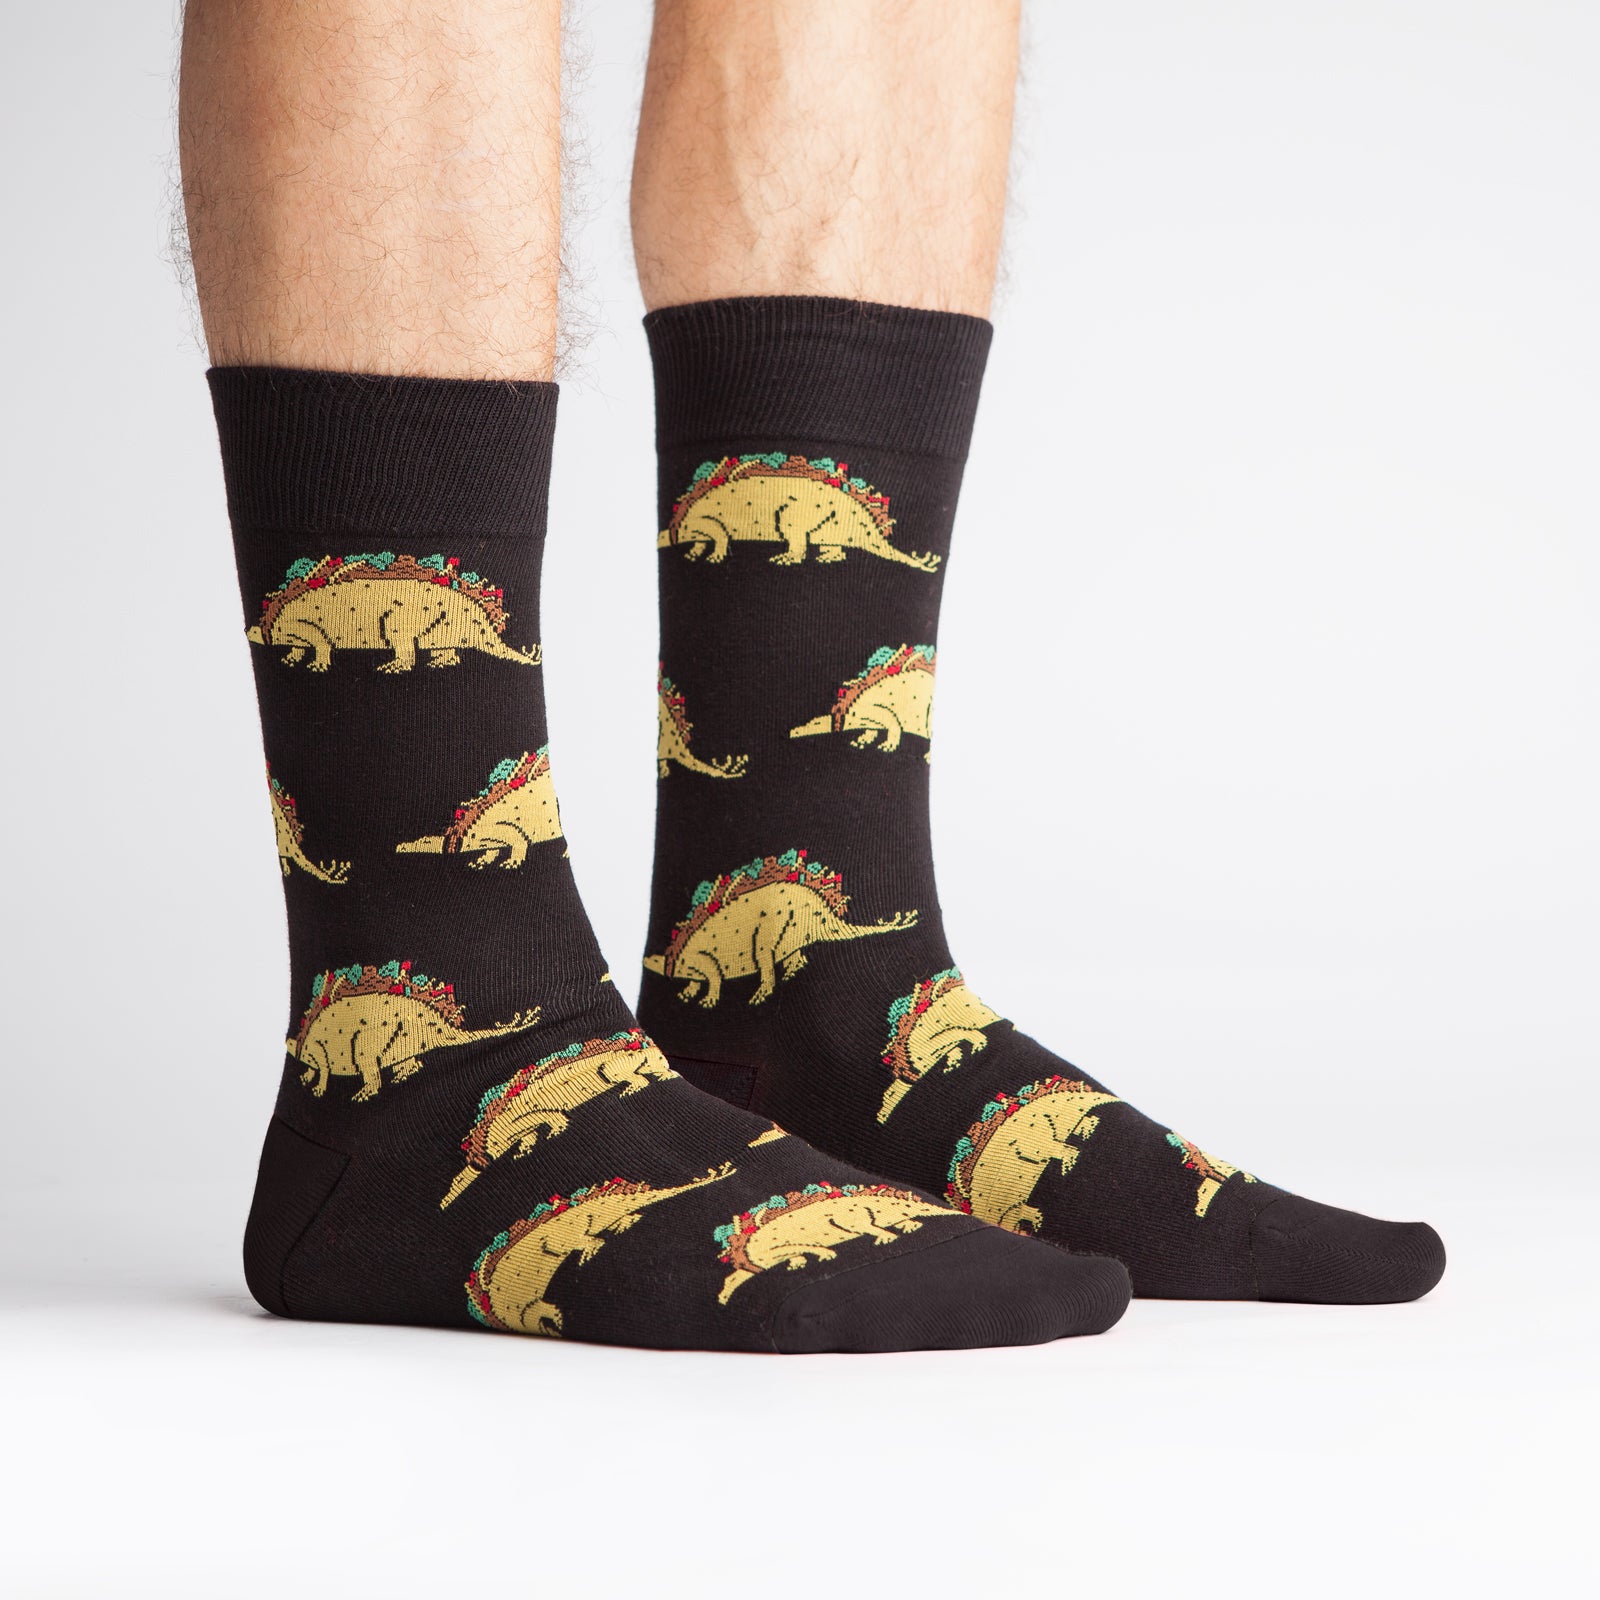 Sock It To Me black men's crew sock Tacosaurus featuring taco-dinosaurs all over worn by model seen from side